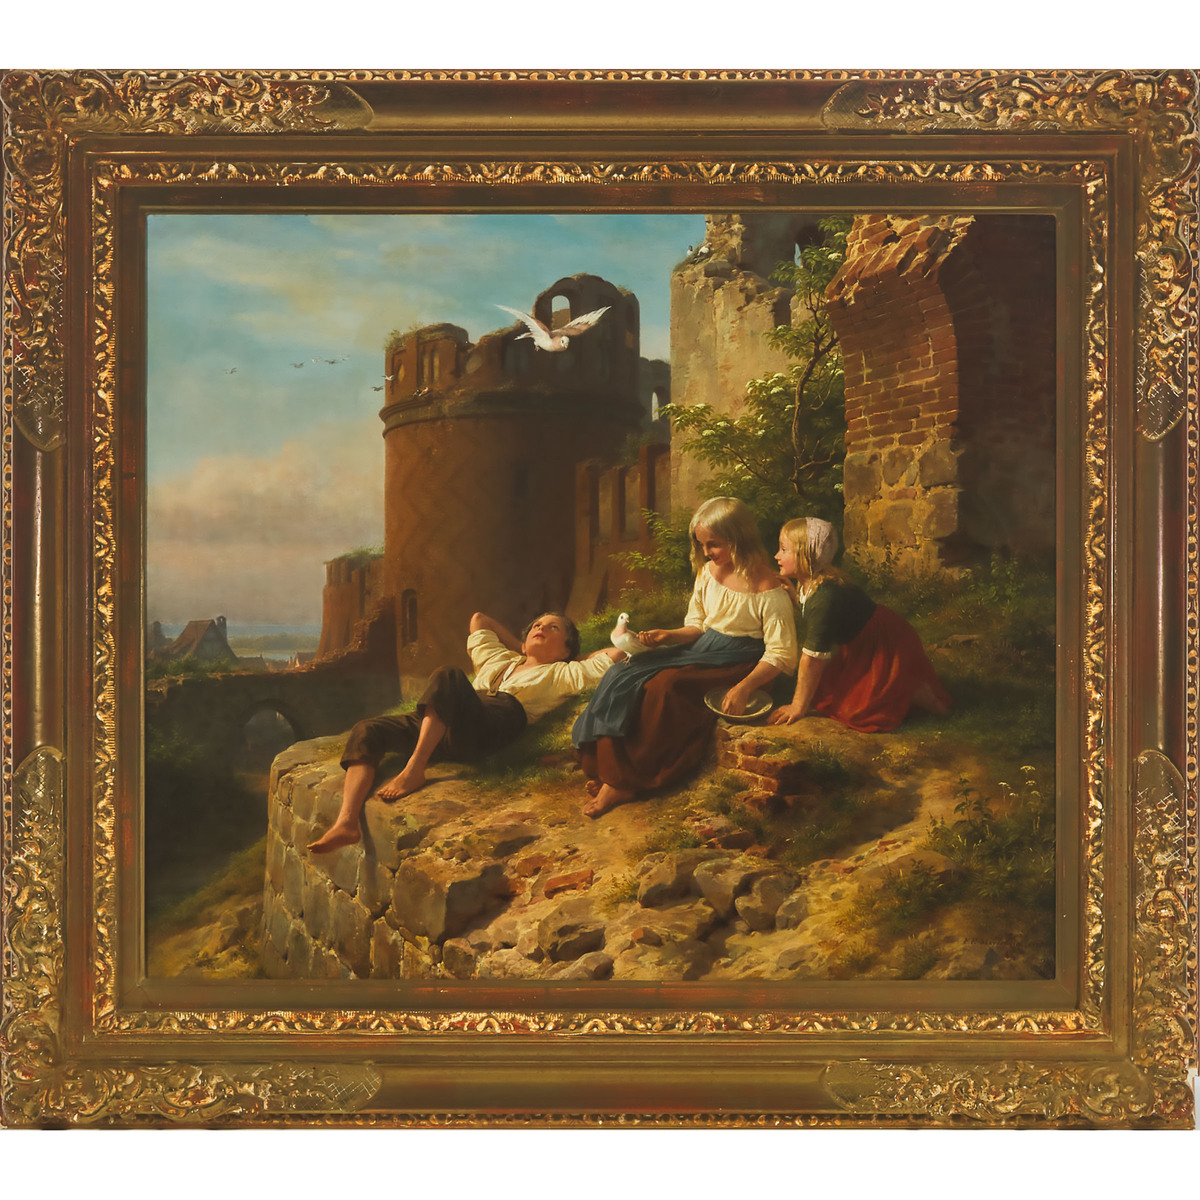 Friedrich Eduard Meyerheim (1808-1879), CHILDREN PLAYING BY THE RUINS, 1845, signed and dated lower - Image 2 of 4